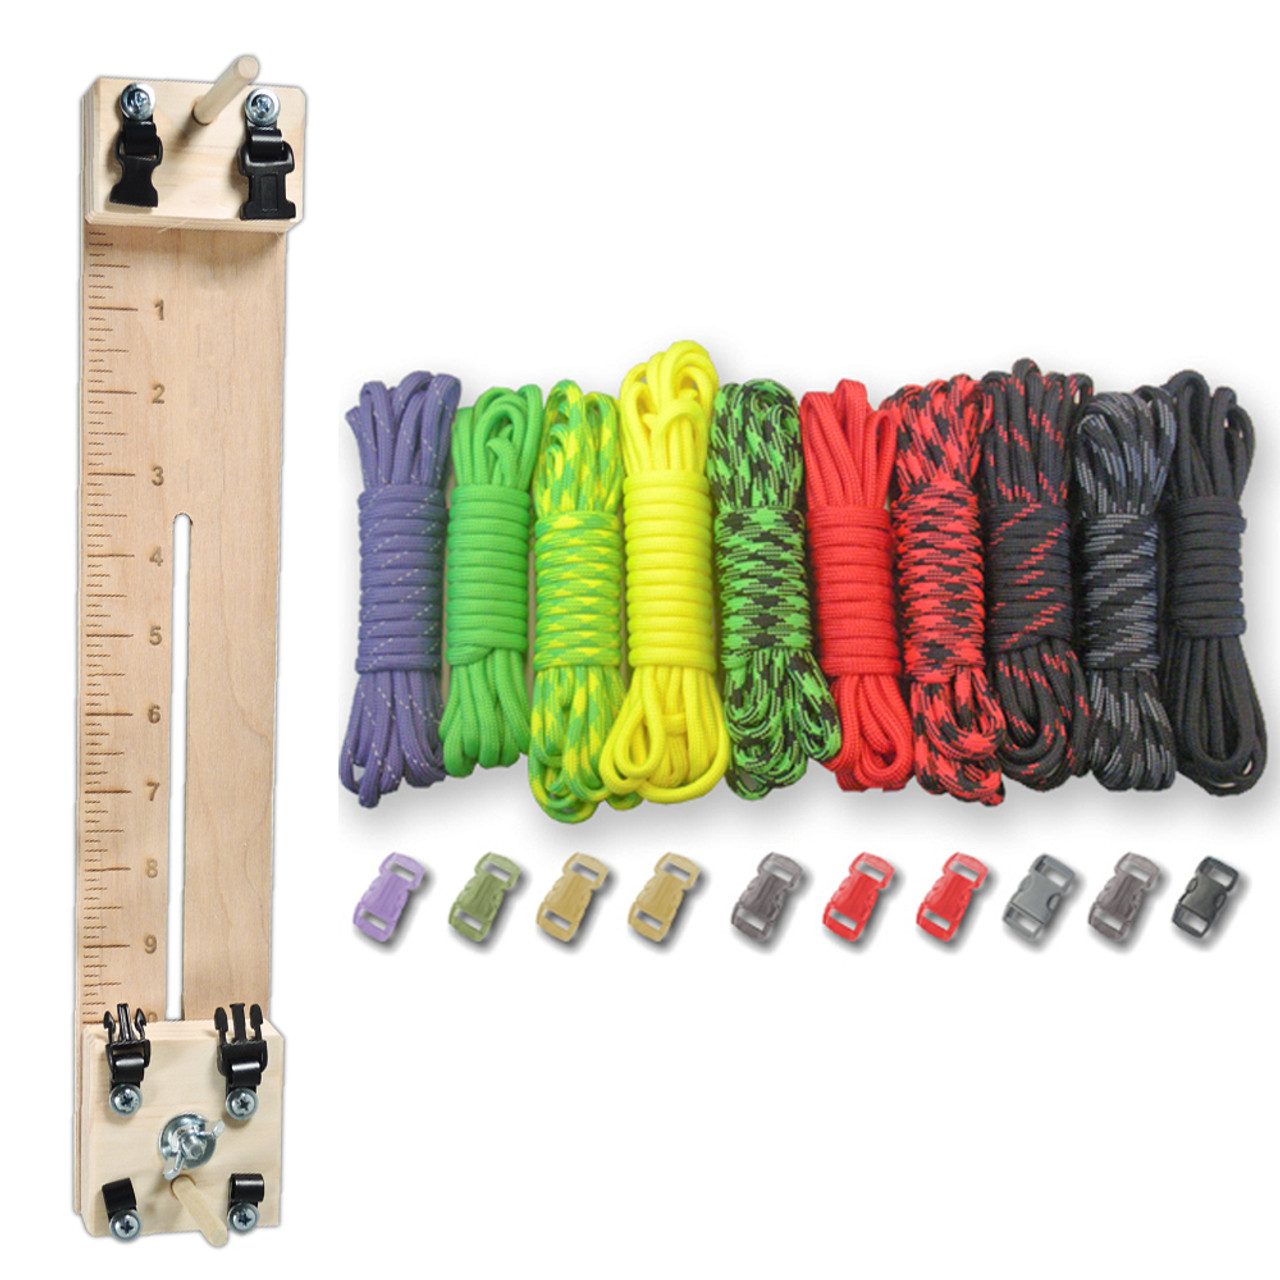 Ultimate Paracord Jig for Paracord Projects